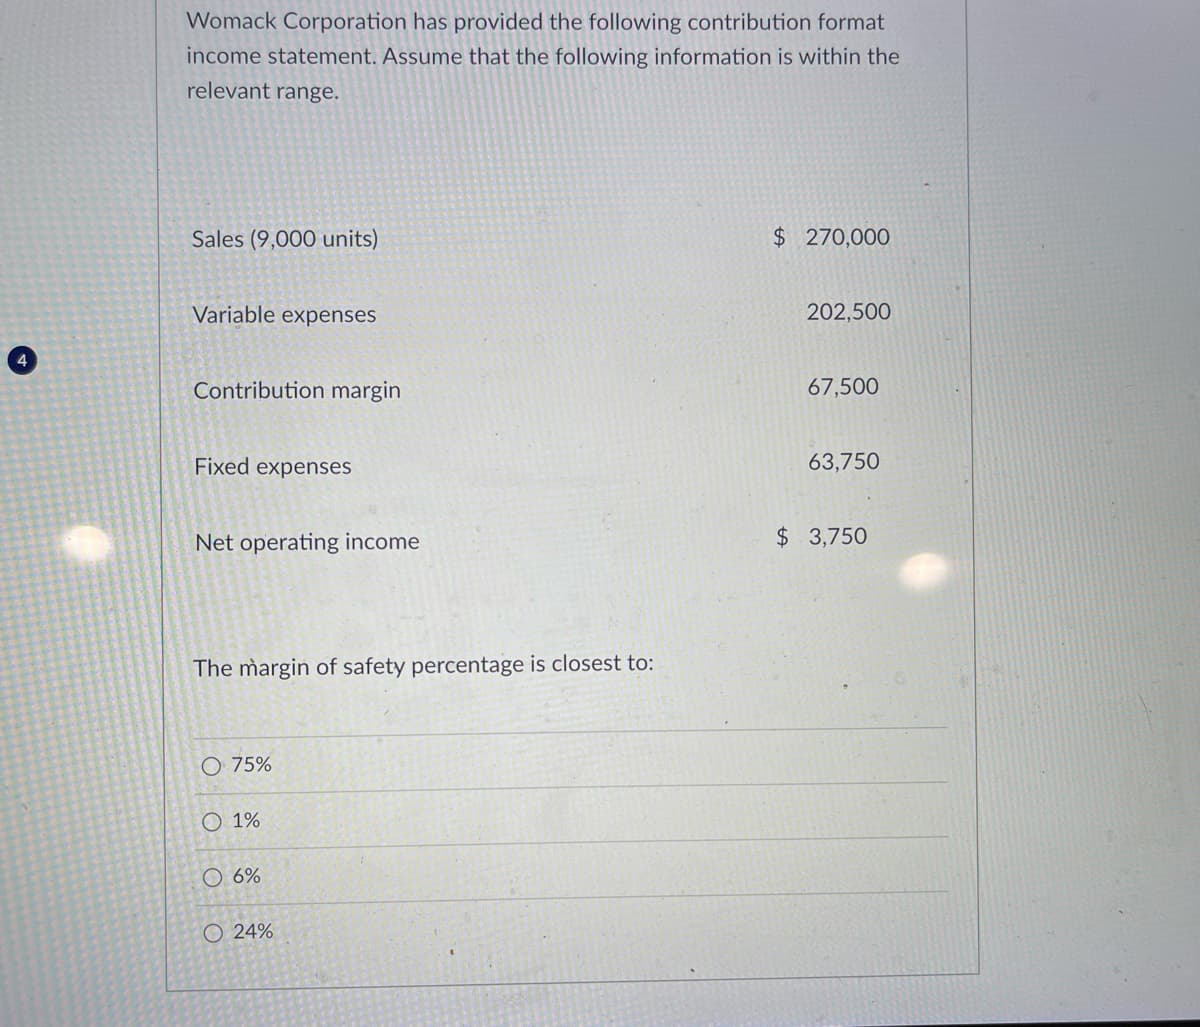 4
Womack Corporation has provided the following contribution format
income statement. Assume that the following information is within the
relevant range.
Sales (9,000 units)
Variable expenses
Contribution margin
Fixed expenses
Net operating income
The margin of safety percentage is closest to:
O 75%
1%
O 6%
O 24%
$ 270,000
202,500
67,500
63,750
$3,750